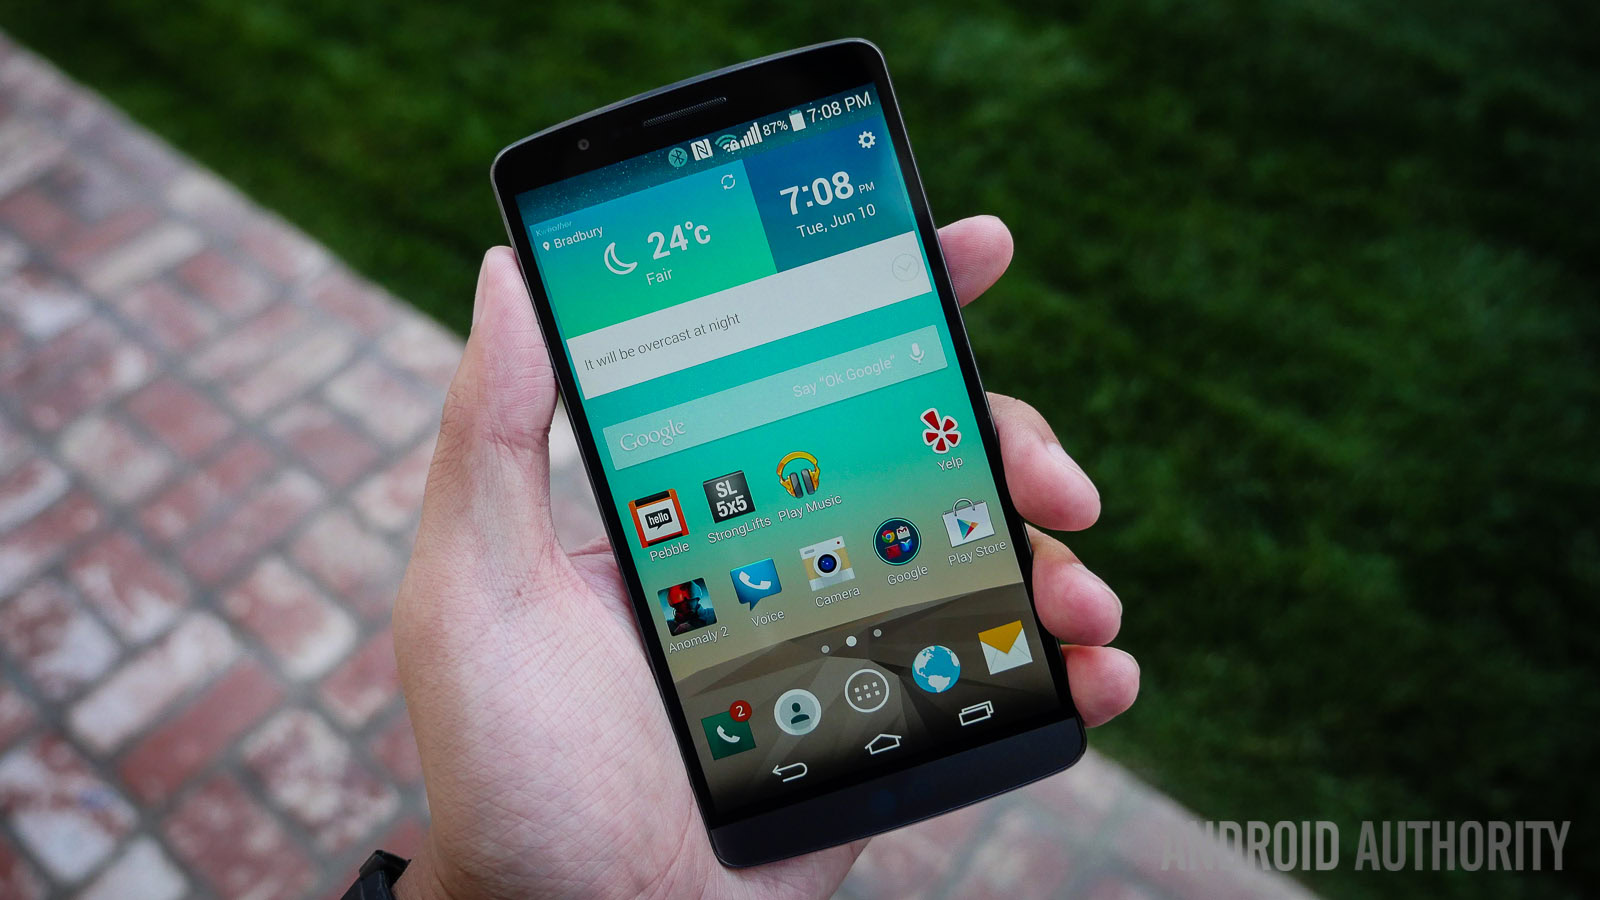 LG G3 Beat detailed review